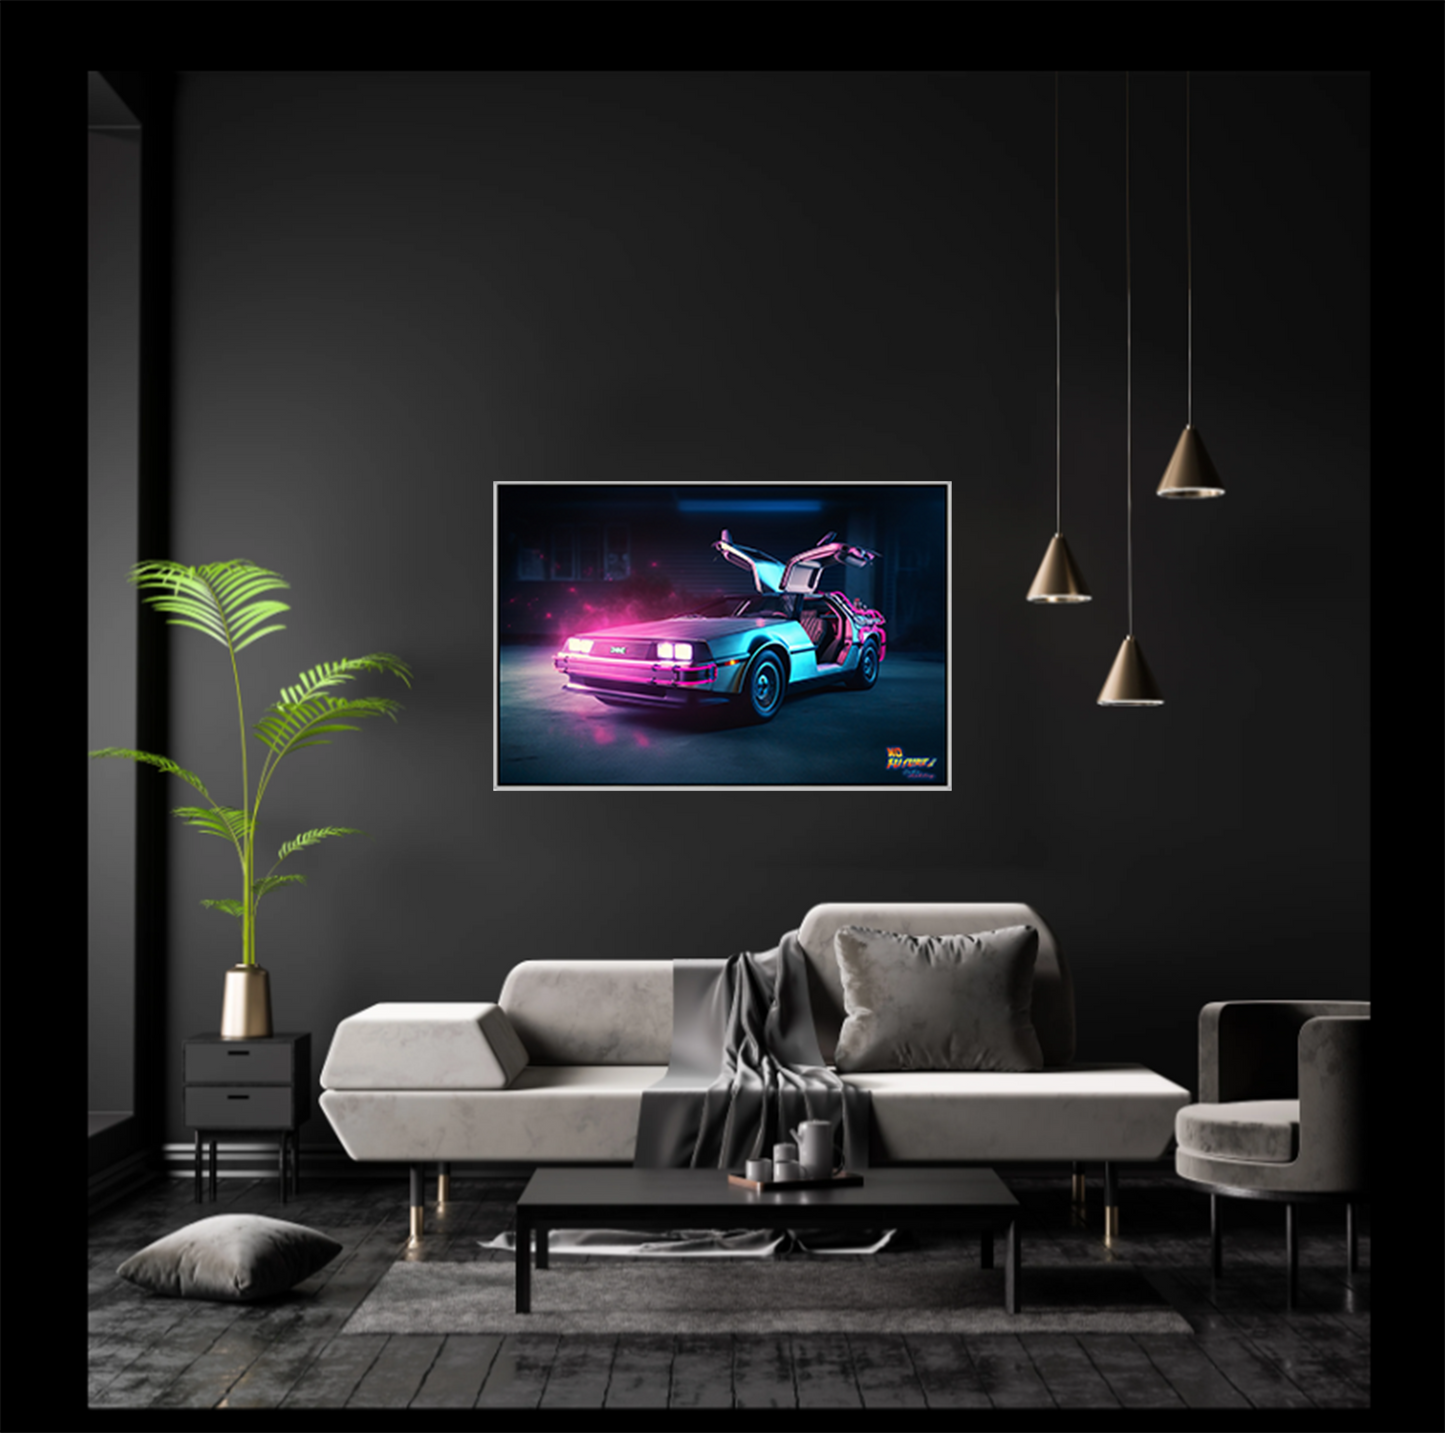 Neon DeLorean 24" x 36" limited Edition Acrylic Print in Stainless Steel Floating Frame